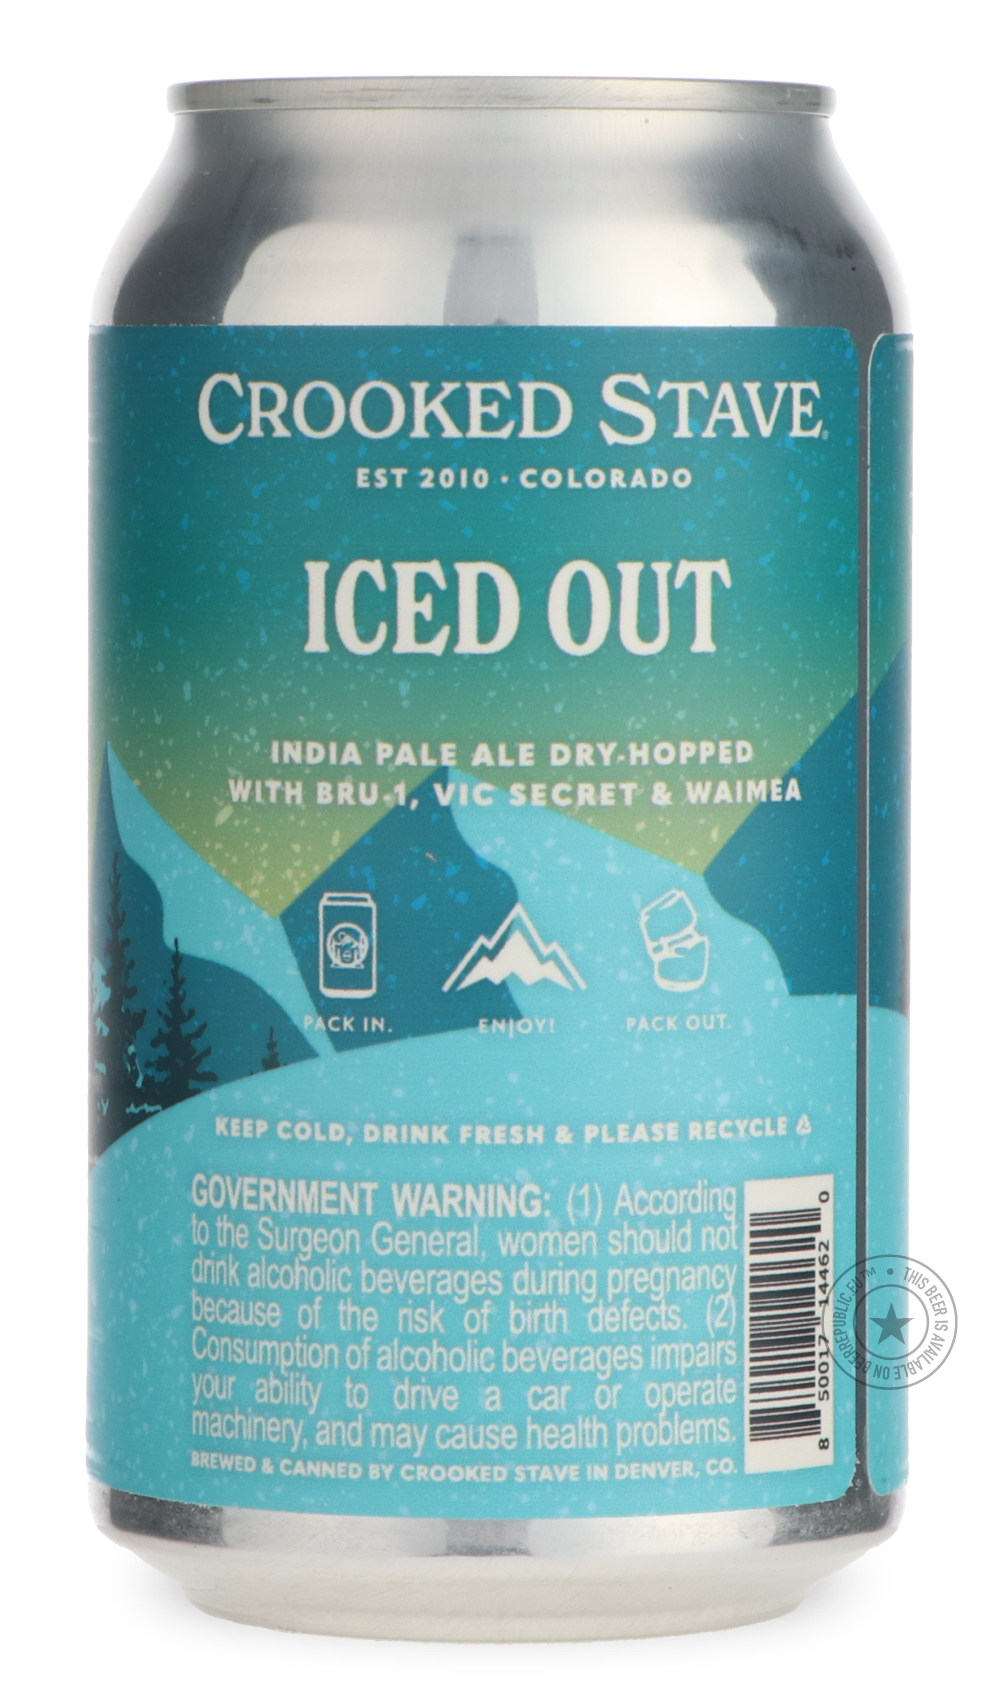 -Crooked Stave- Iced Out-IPA- Only @ Beer Republic - The best online beer store for American & Canadian craft beer - Buy beer online from the USA and Canada - Bier online kopen - Amerikaans bier kopen - Craft beer store - Craft beer kopen - Amerikanisch bier kaufen - Bier online kaufen - Acheter biere online - IPA - Stout - Porter - New England IPA - Hazy IPA - Imperial Stout - Barrel Aged - Barrel Aged Imperial Stout - Brown - Dark beer - Blond - Blonde - Pilsner - Lager - Wheat - Weizen - Amber - Barley W